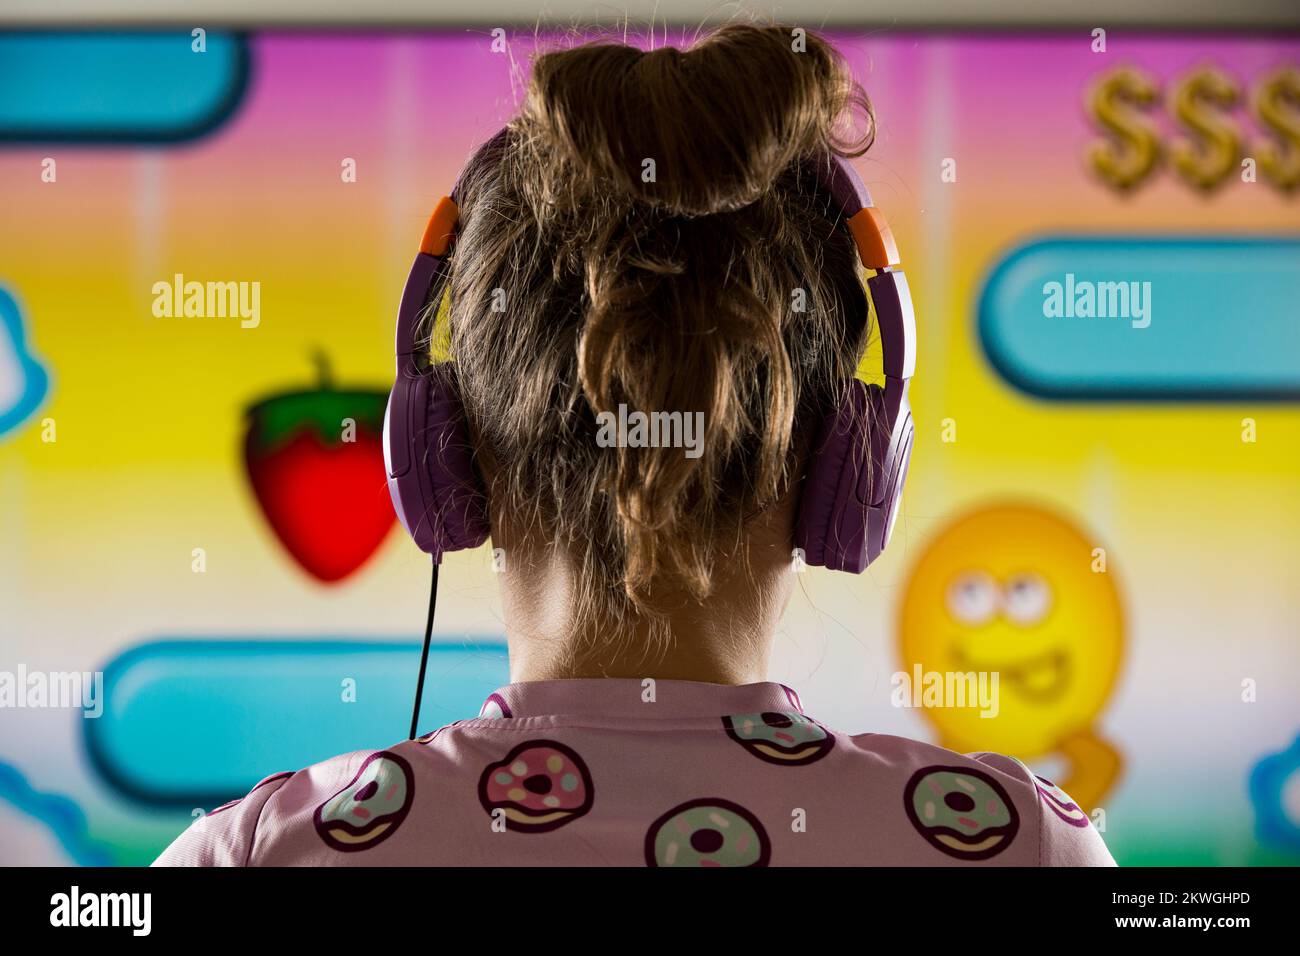 A child or teenager is playing computer video games on a large screen. Online video game technology and teen gaming addiction Stock Photo